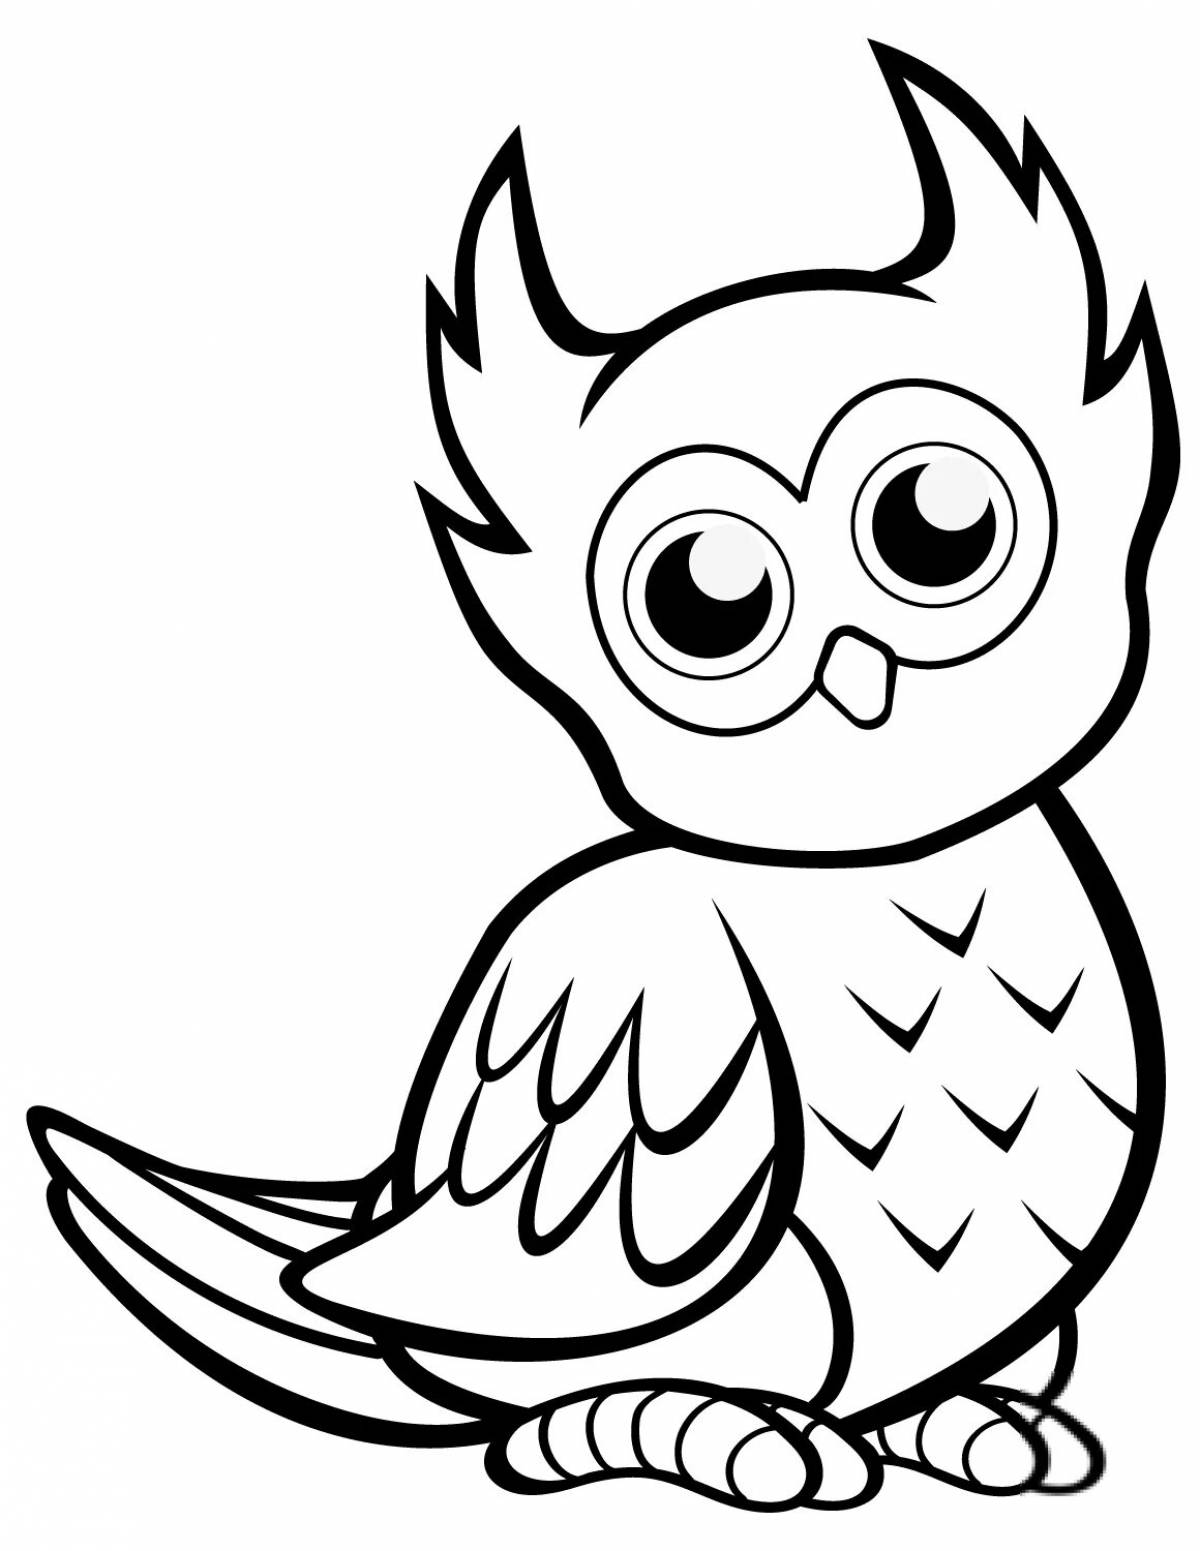 Owl for babies #1